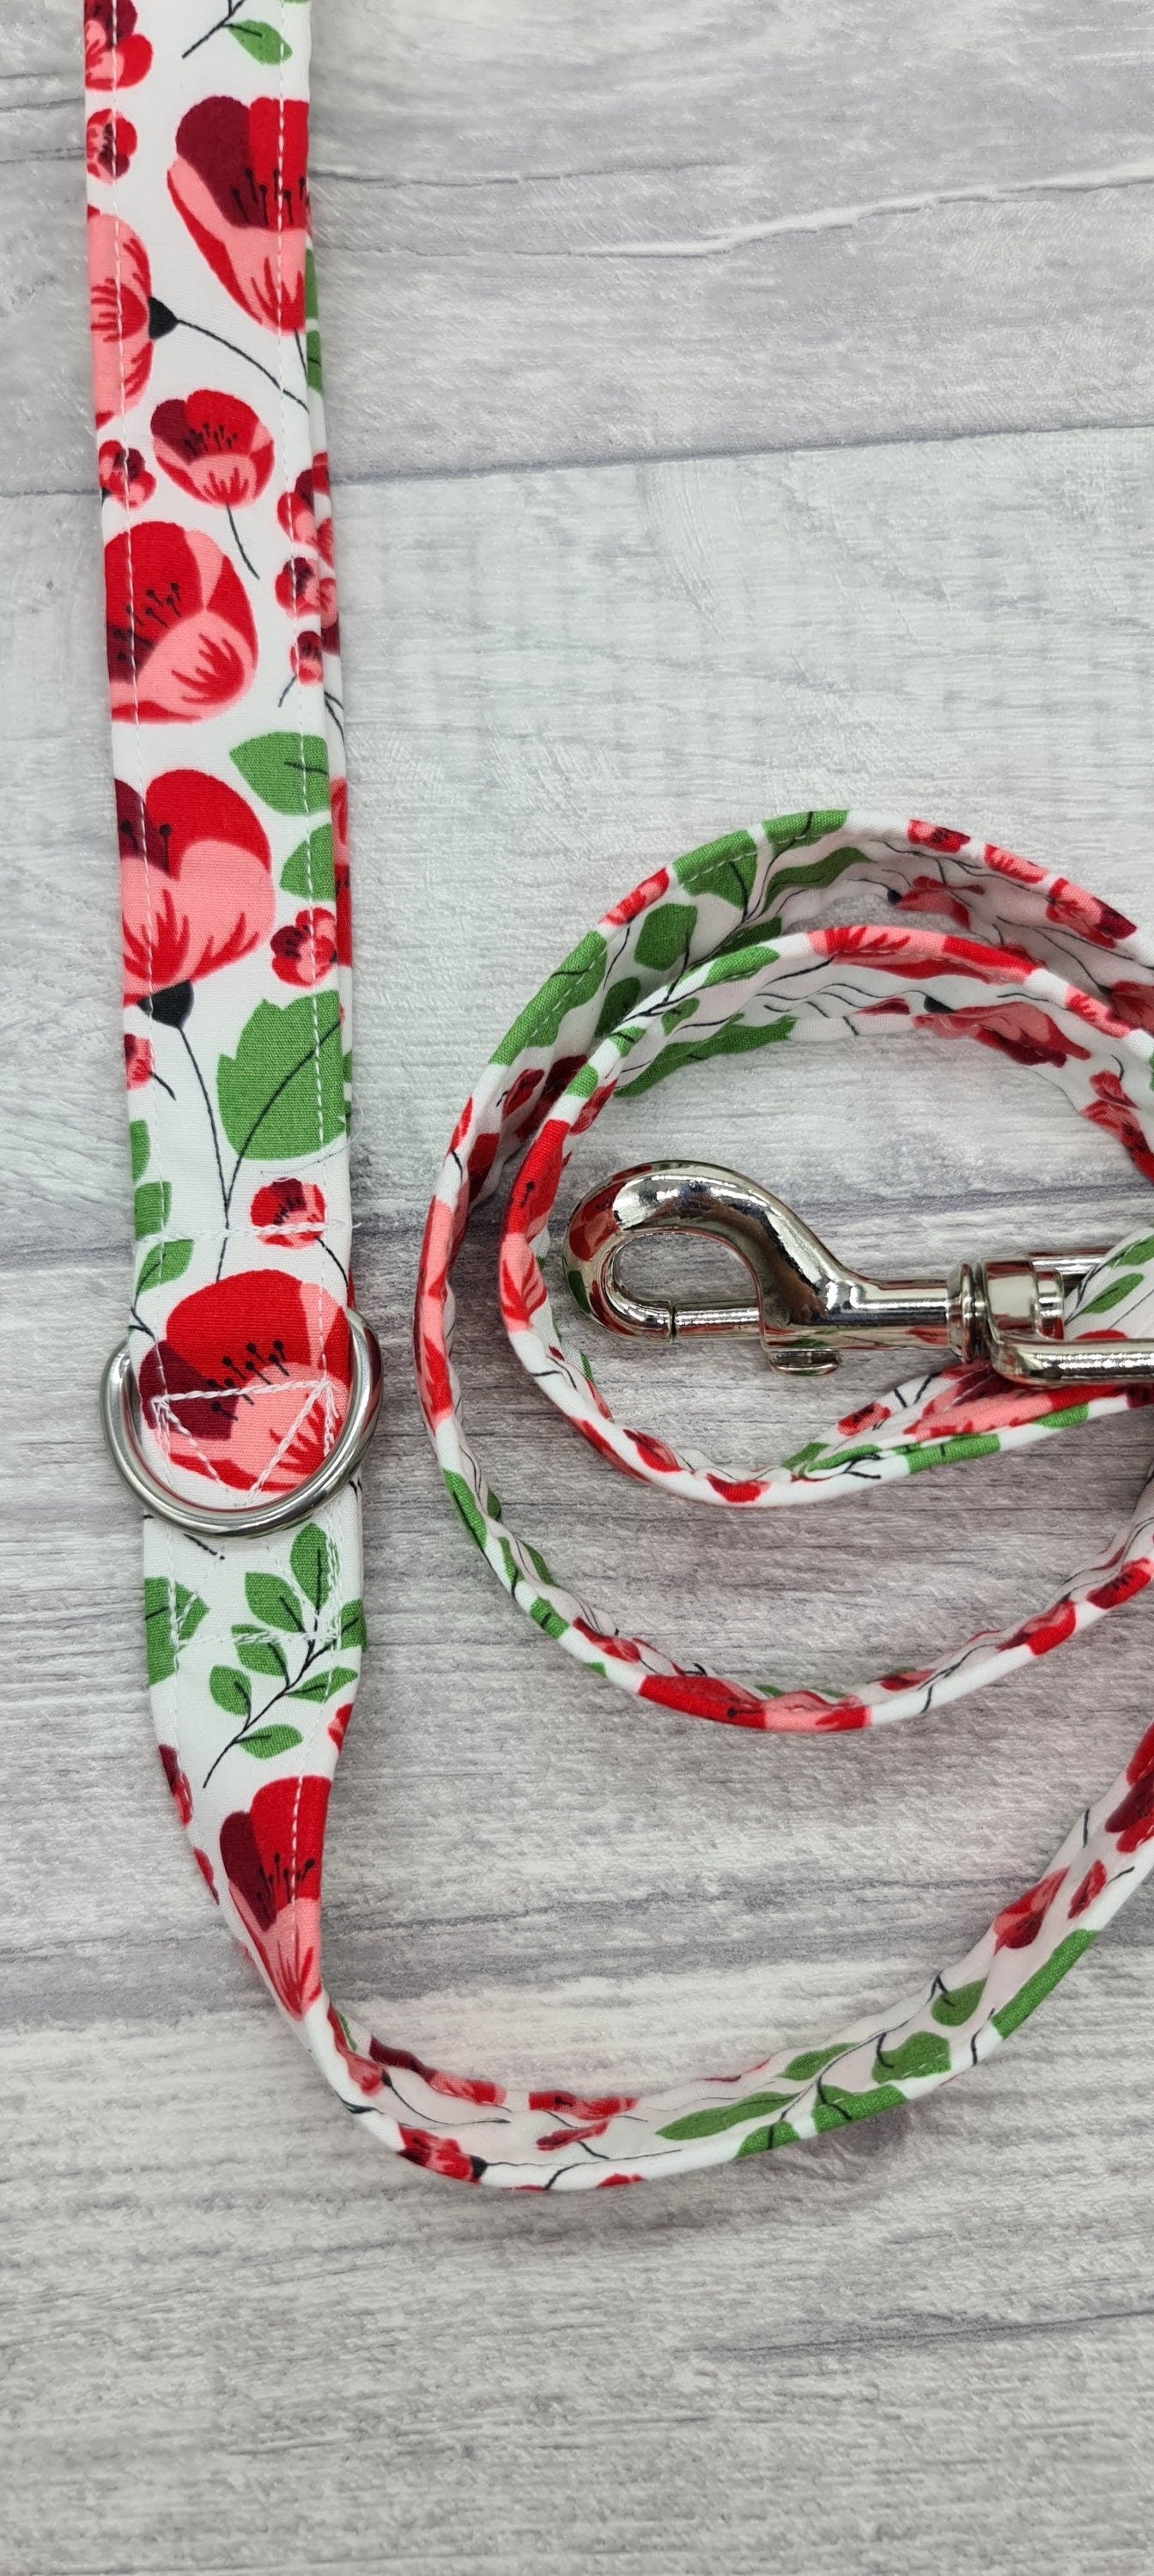 Bright and beautiful Poppy print dog lead with d ring